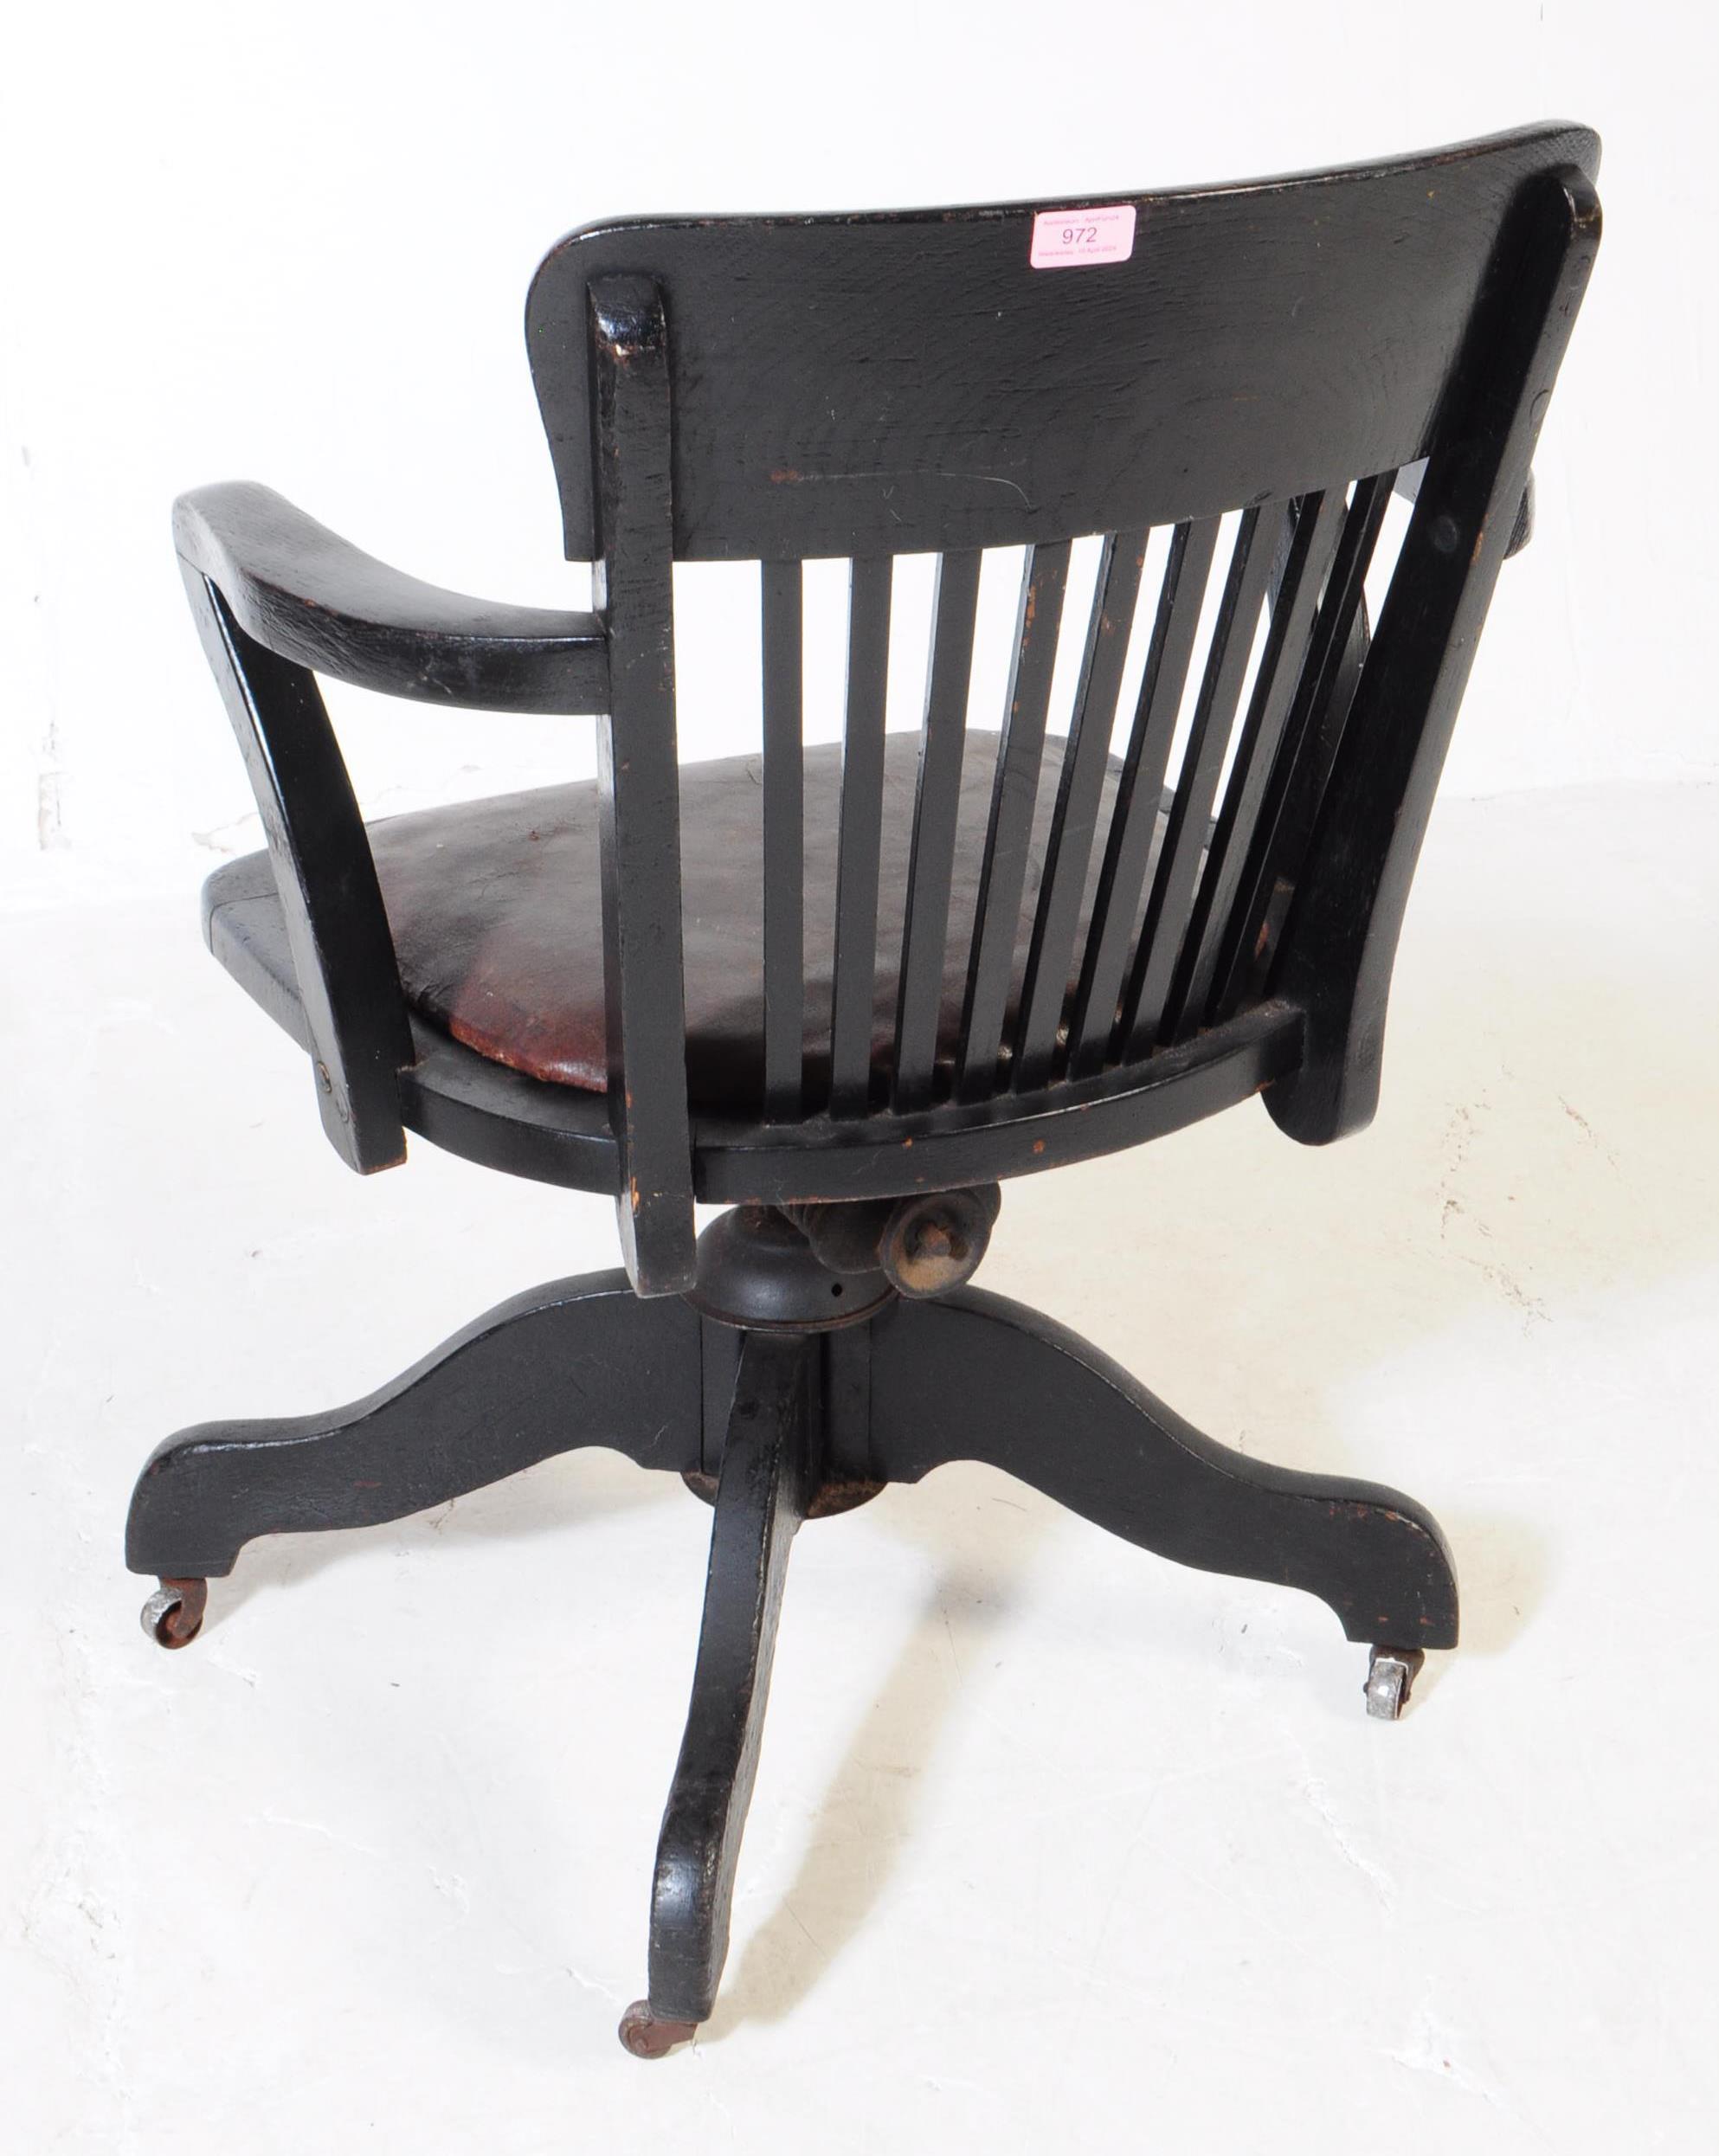 EARLY 20TH CENTURY SWIVEL DESK CHAIR - Image 6 of 7